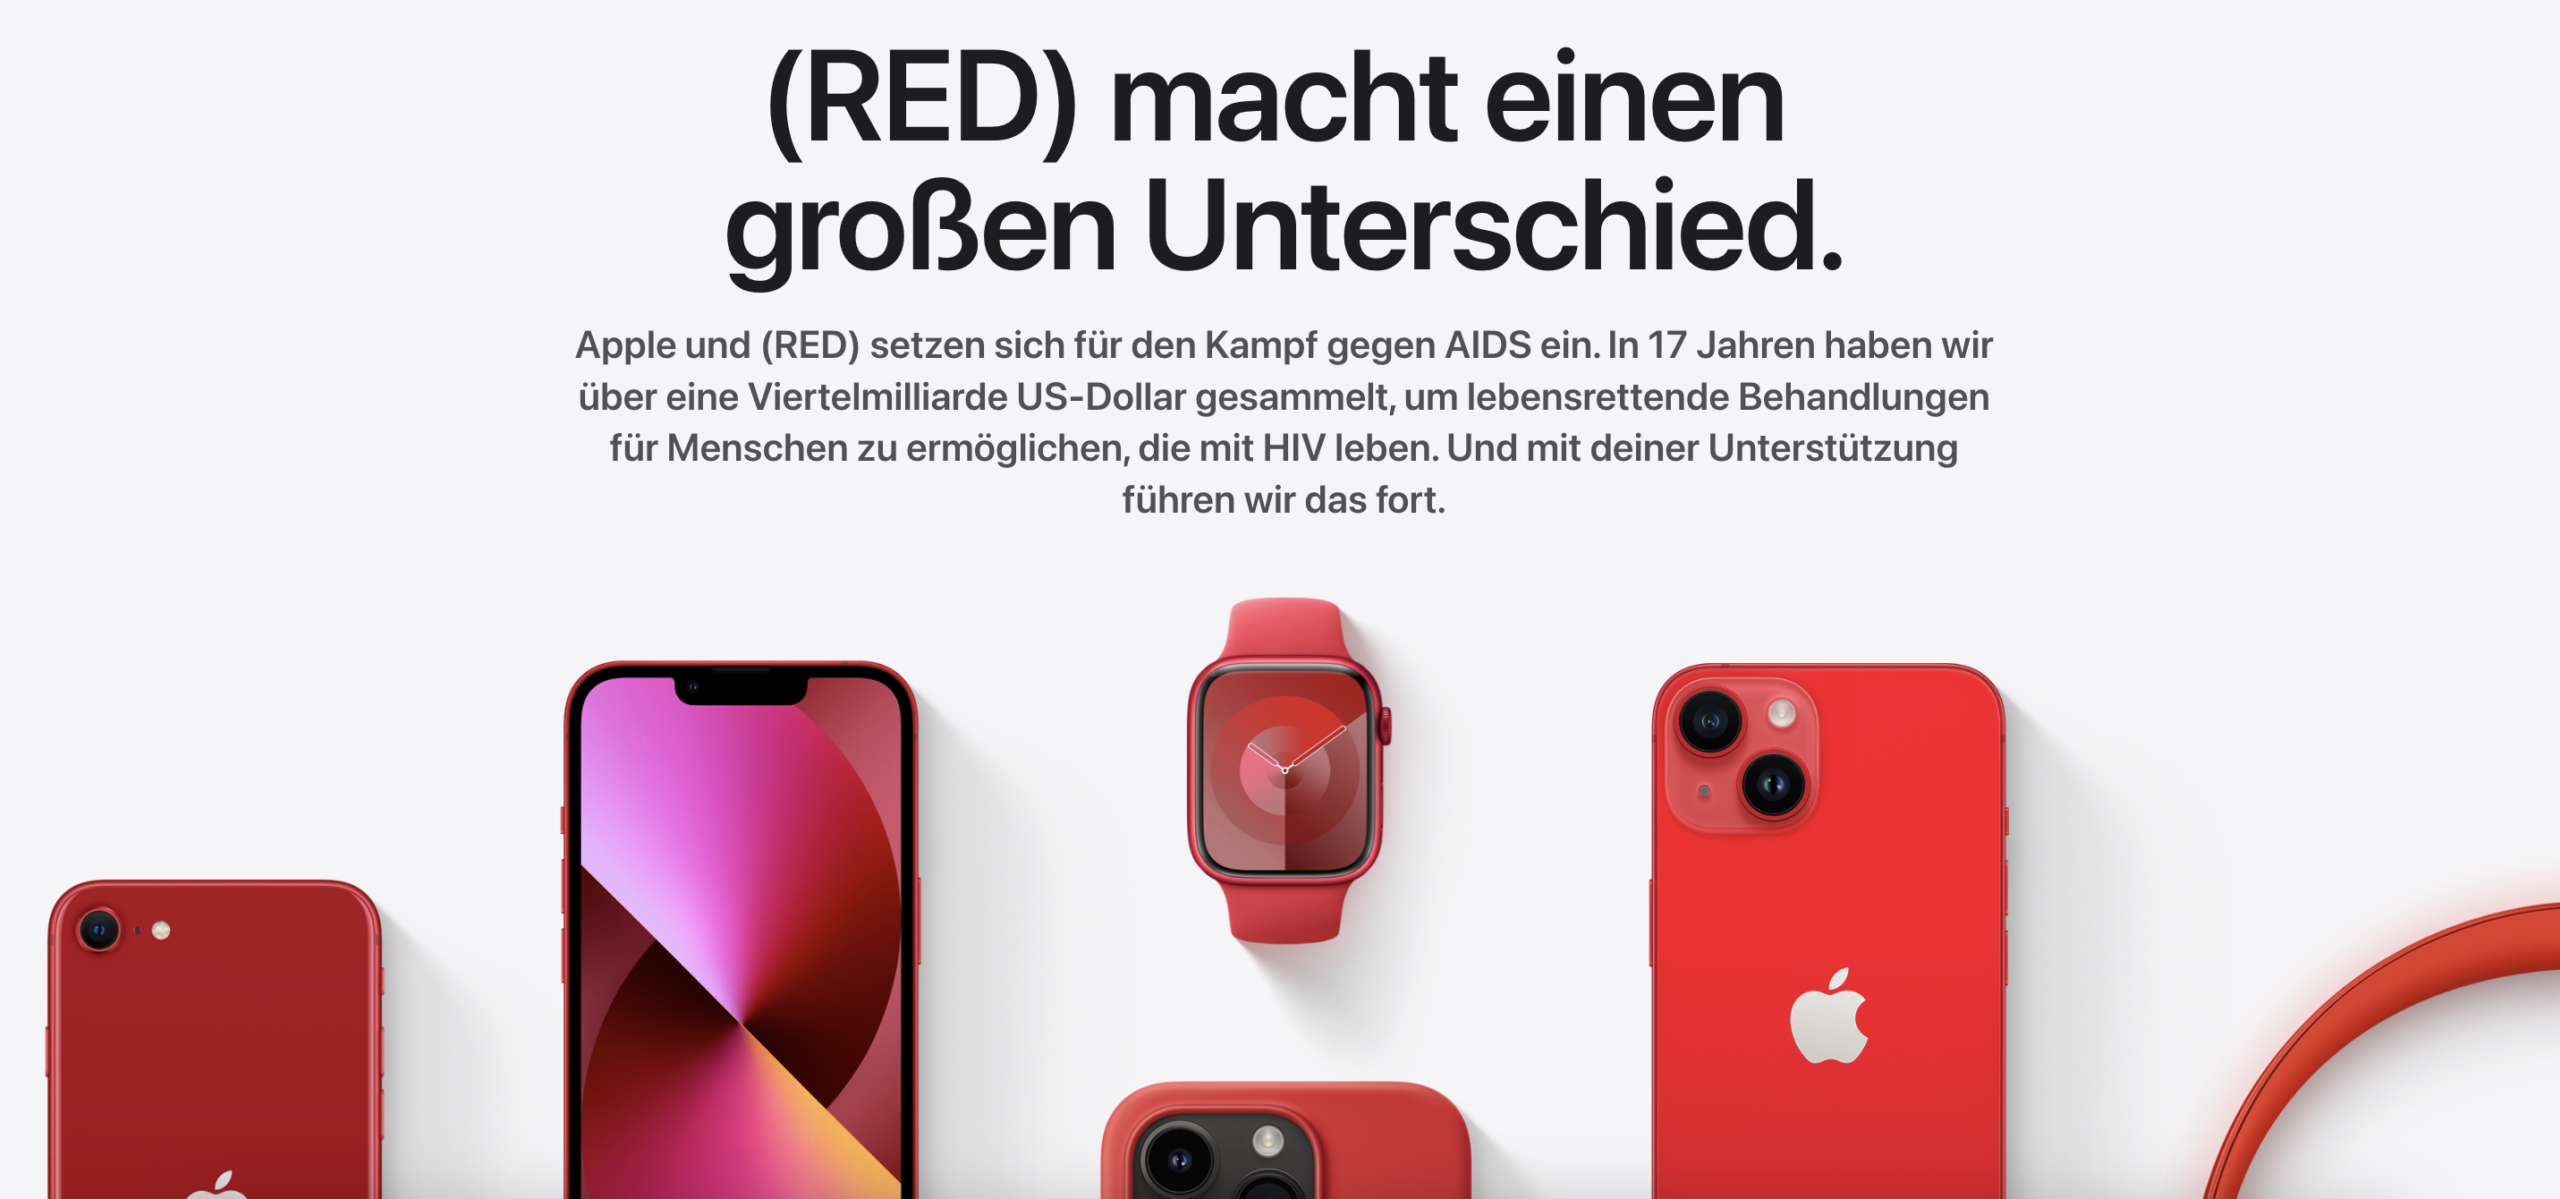 Welt AIDS Tag Apple Product (RED)